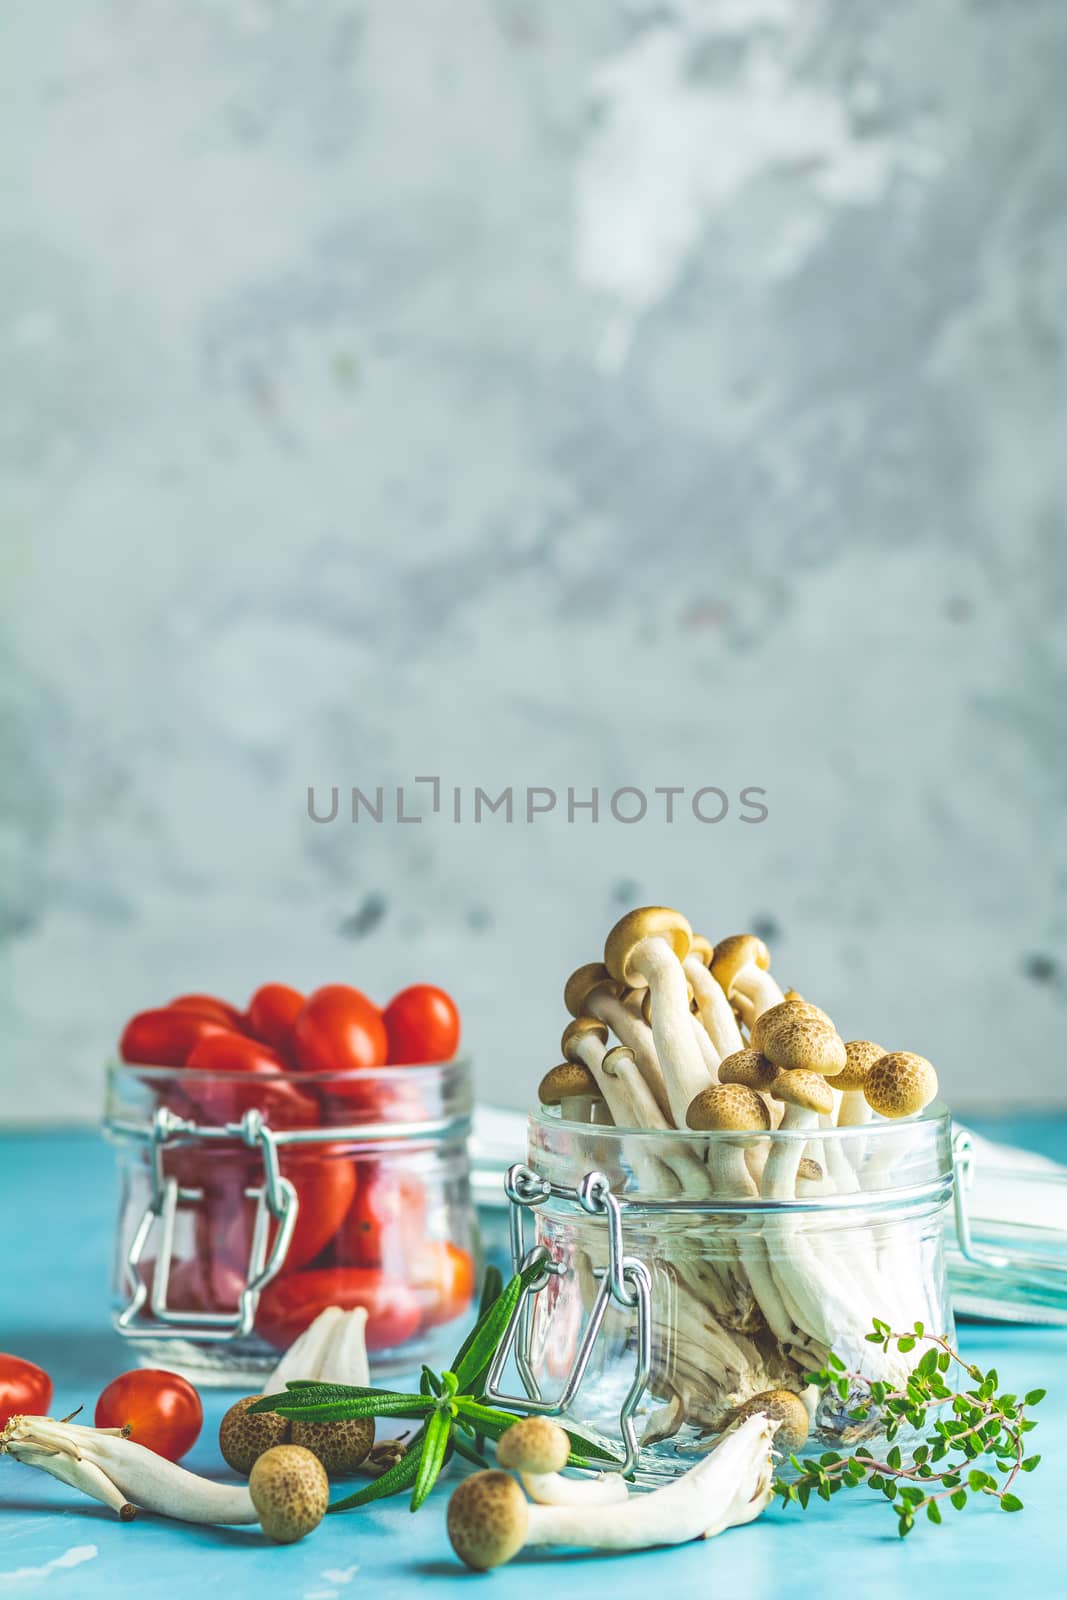 Buna Shimeji - edible mushroom from East Asia. Good food for good health. Clump of shimeji mushroom and cherry tomatoes in jars on blue concrete surface background